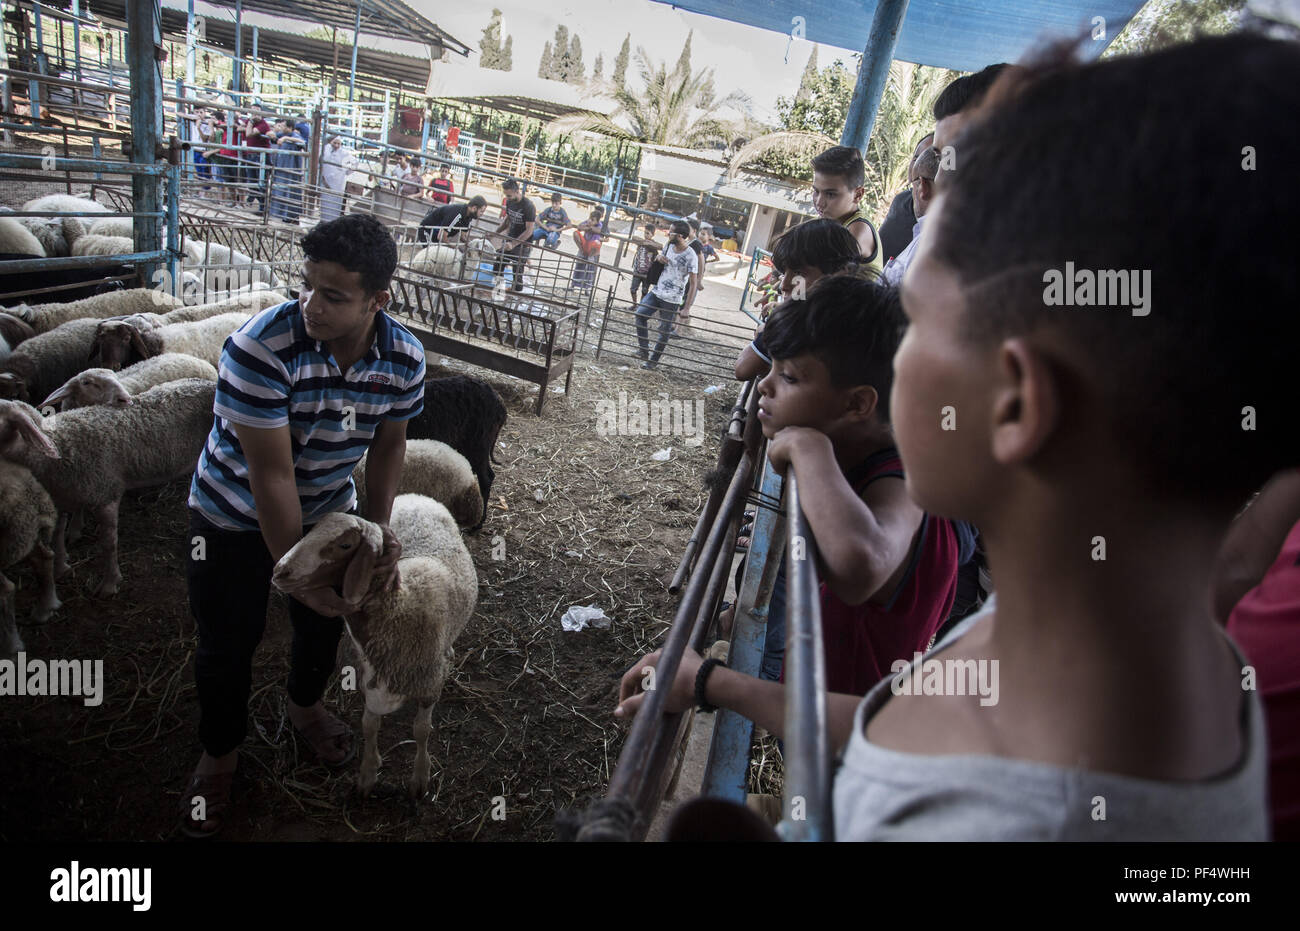 Gaza City, The Gaza Strip, Gaza. 18th Aug, 2018. Children seen watching a goat with the farmer.Palestinians gather in a cattle shop to purchase cattles to be sacrificed. before Eid al-Adha in the east of Jabalya refugee camp. Eid al-Adha (Festival of Sacrifice) is celebrated throughout the Islamic world as the commemoration of Abraham's will to sacrifice his son for God, cows, camels, goats and sheep are traditionally slaughtered on the Holy Day. Credit: Mahmoud Issa/SOPA Images/ZUMA Wire/Alamy Live News Stock Photo